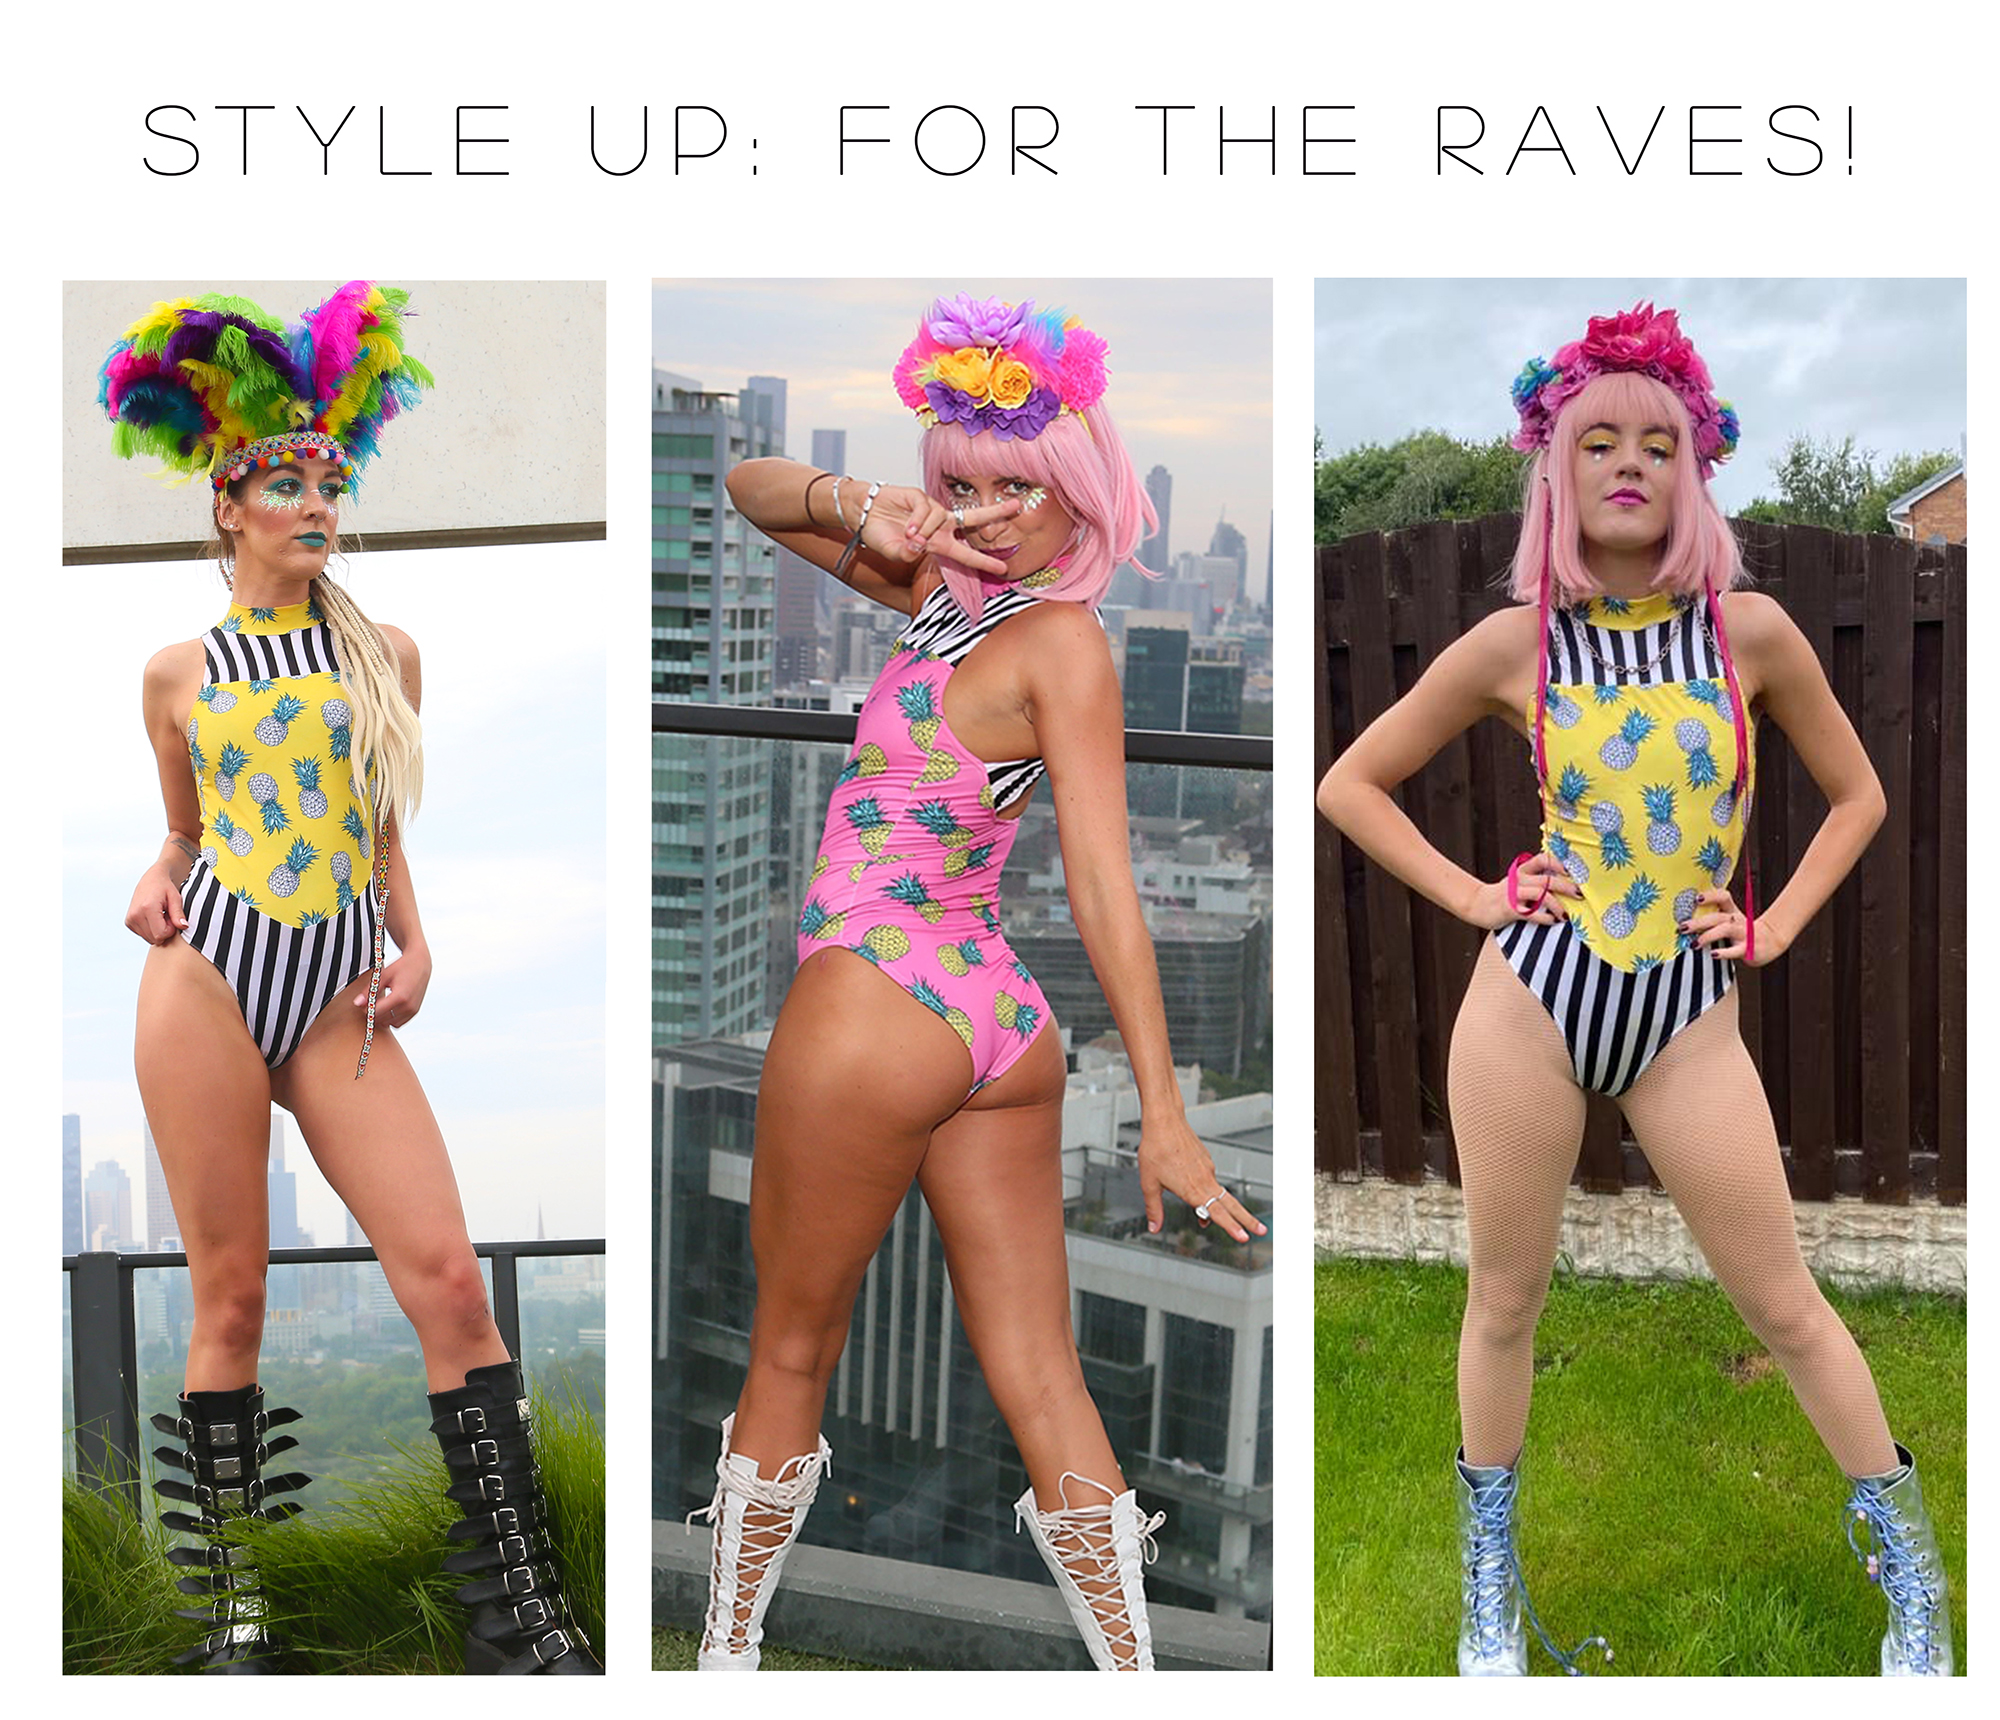 Euphoric Threads Style Series - The Babylon Bodysuit - Eco Fashion for the waves and raves